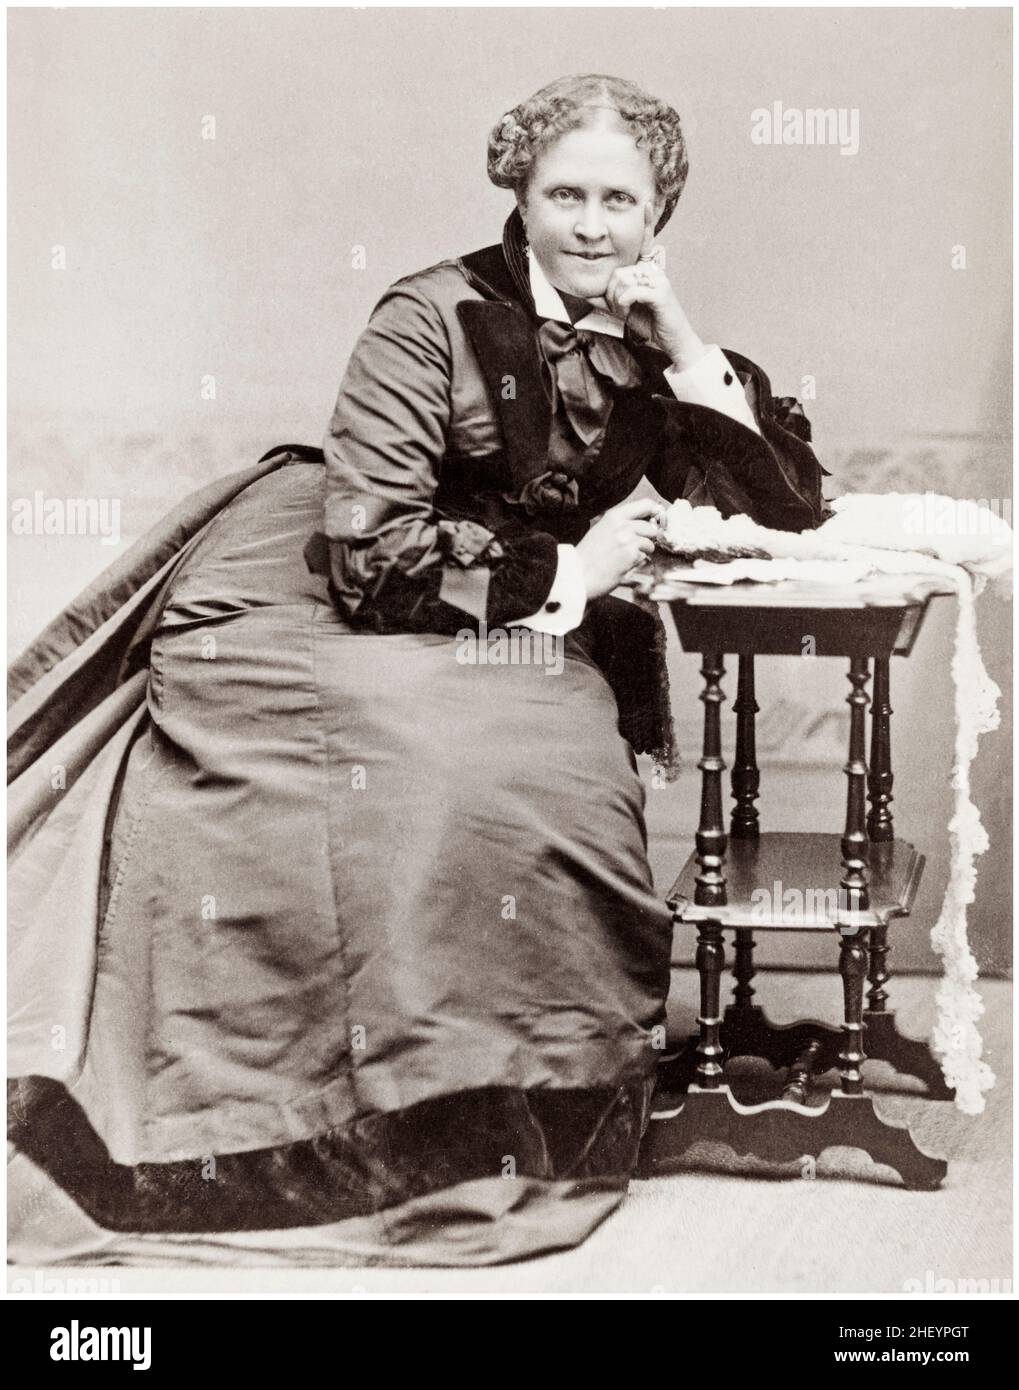 Helen Hunt Jackson (1830-1885), American poet and writer, activist on behalf of improved treatment of Native Americans, portrait photograph by Charles F. Conly, circa 1884 Stock Photo